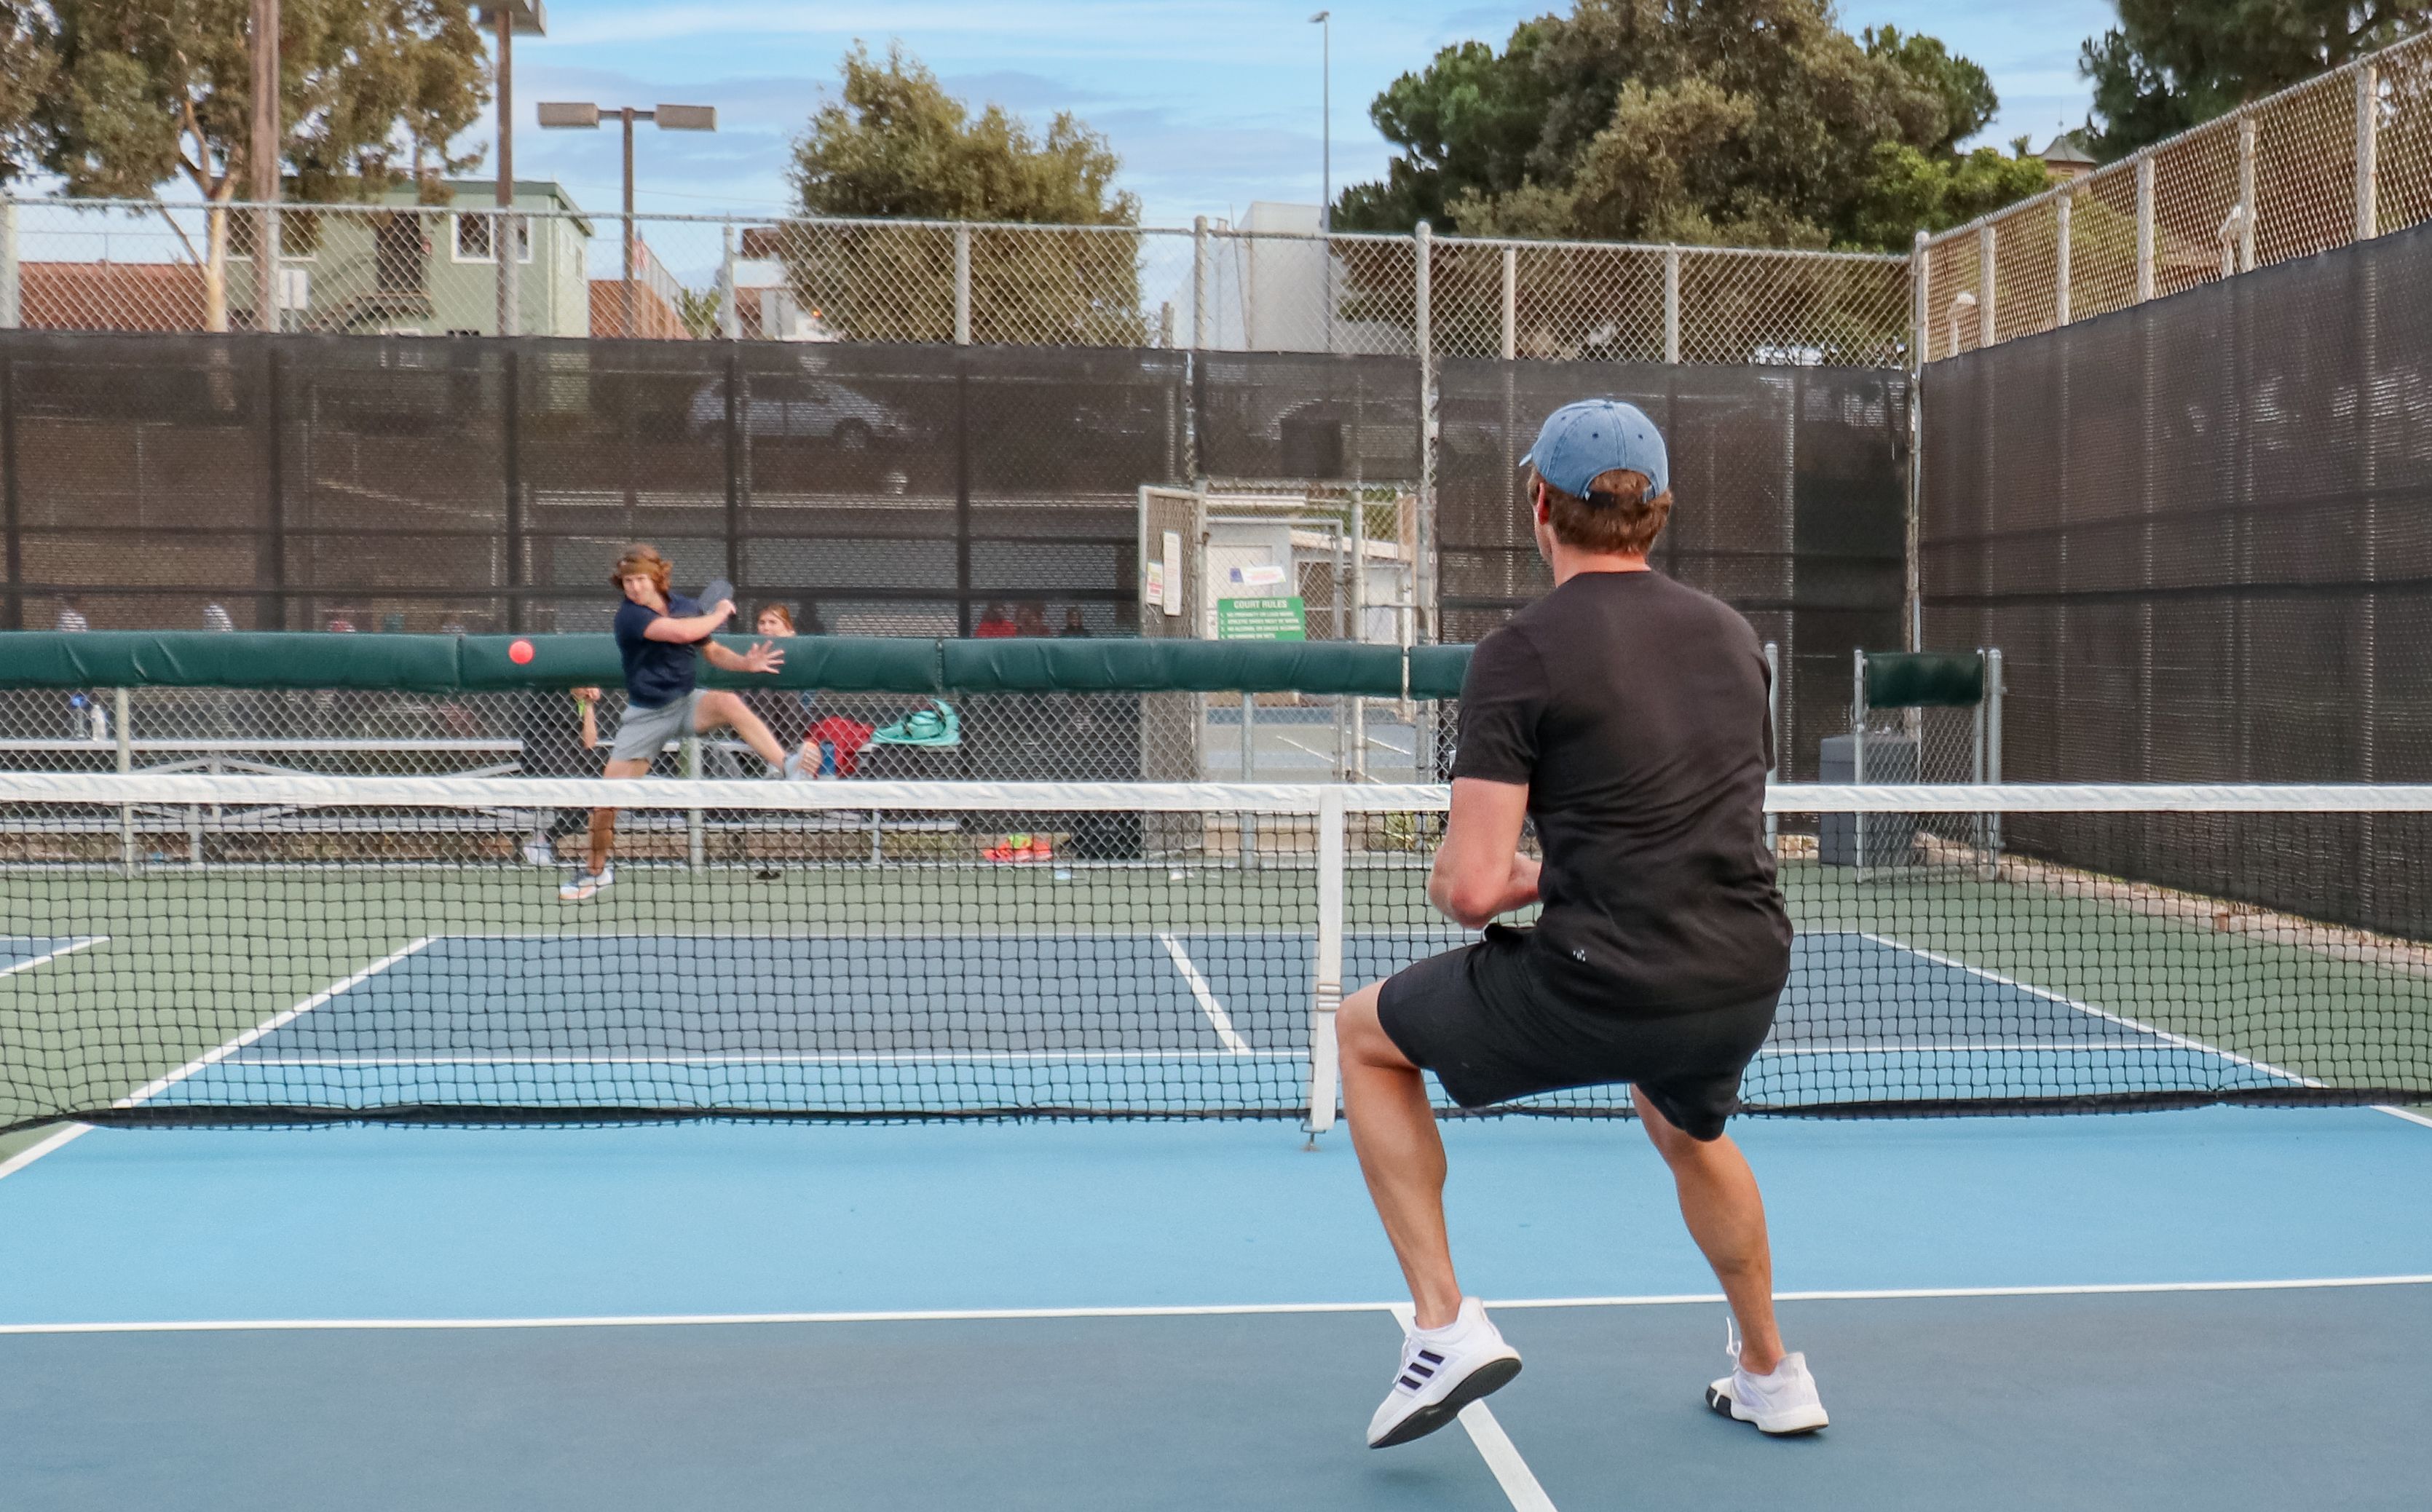 Two players in the middle of a game of singles pickleball